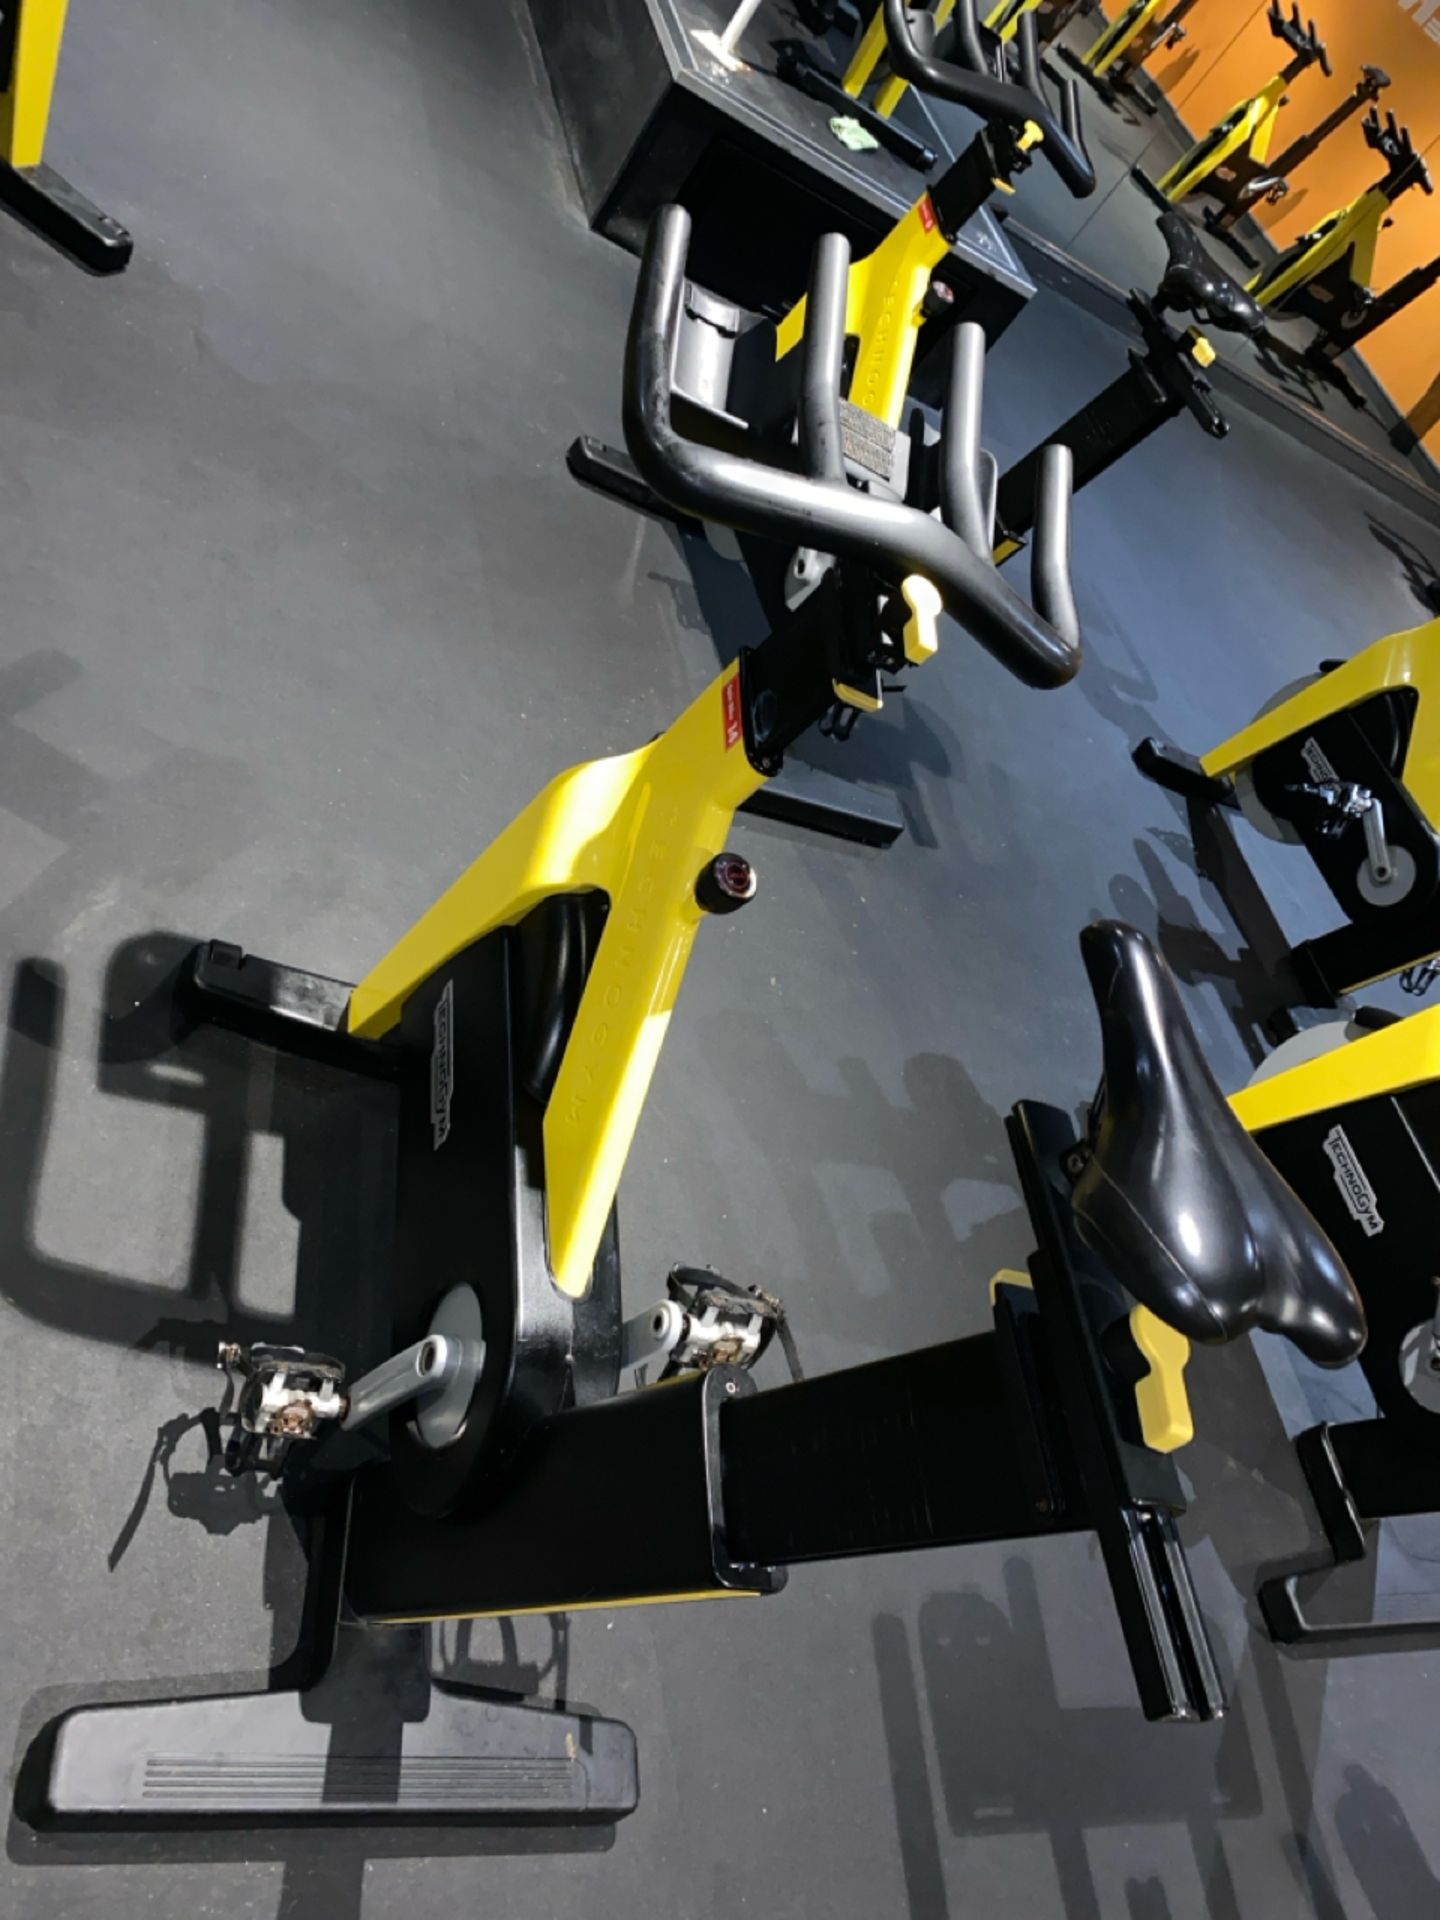 Technogym Group Cycle Ride Spin Bike - Image 3 of 8